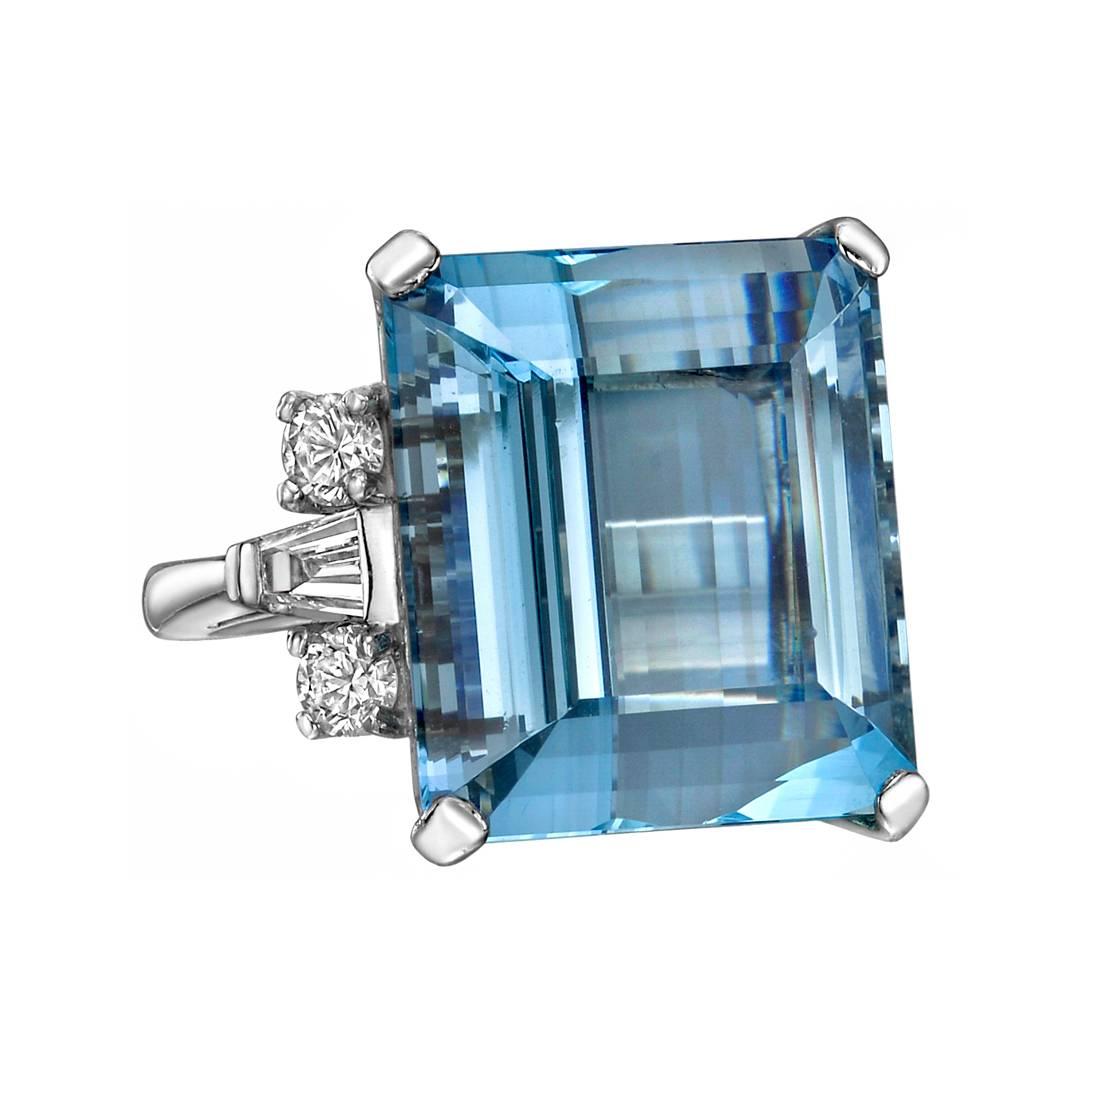 Aquamarine and diamond cocktail ring, centering an emerald cut aquamarine weighing approximately 25.00 carats, with round brilliant cut and tapered baquette cut diamond accented shoulders, in platinum. Four round brilliant cut diamonds weighing